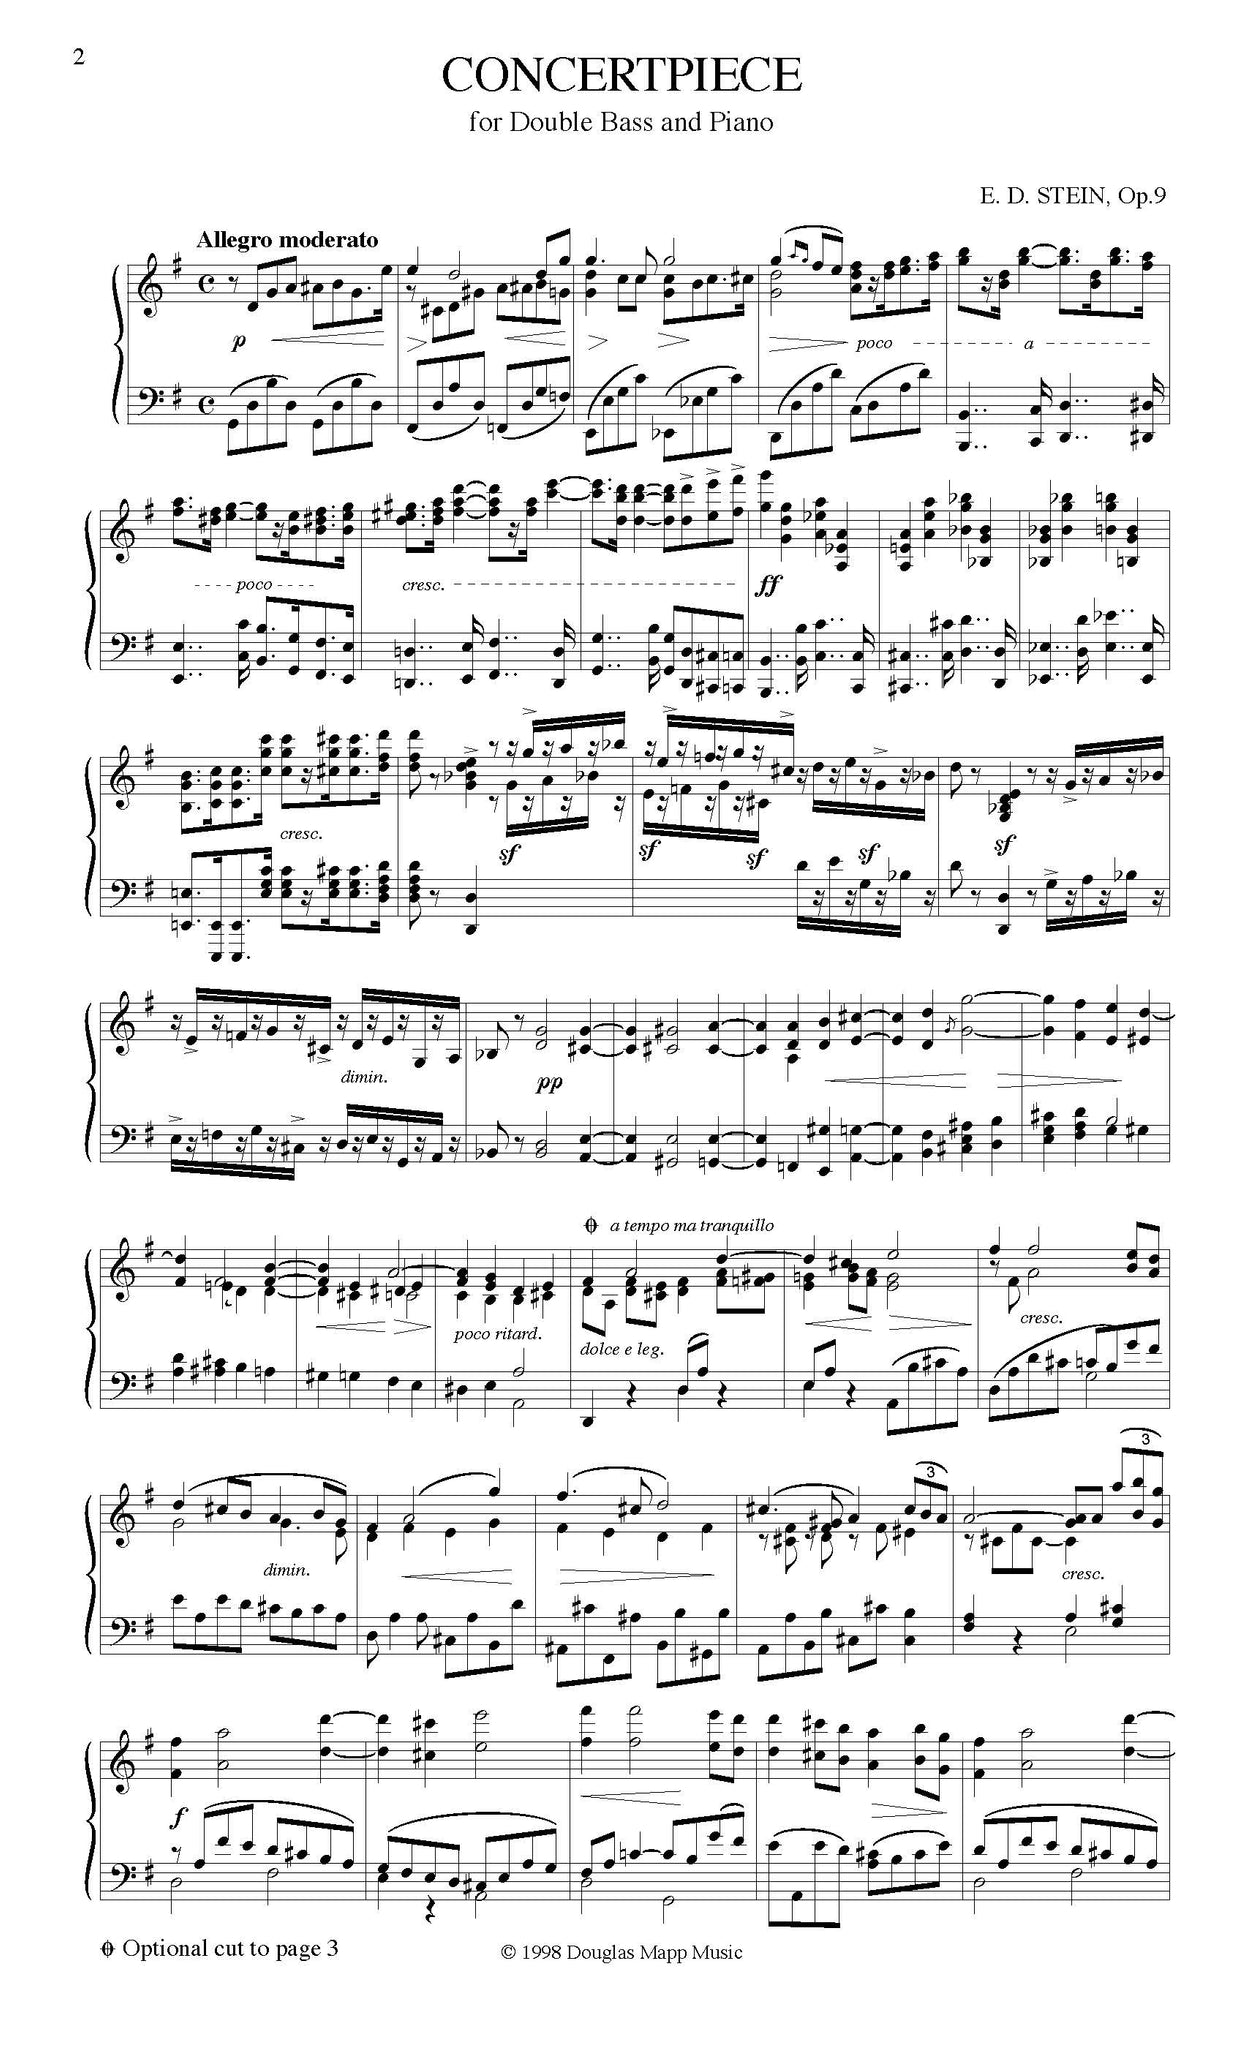 Stein Concertpeice orchestra tuning page 1